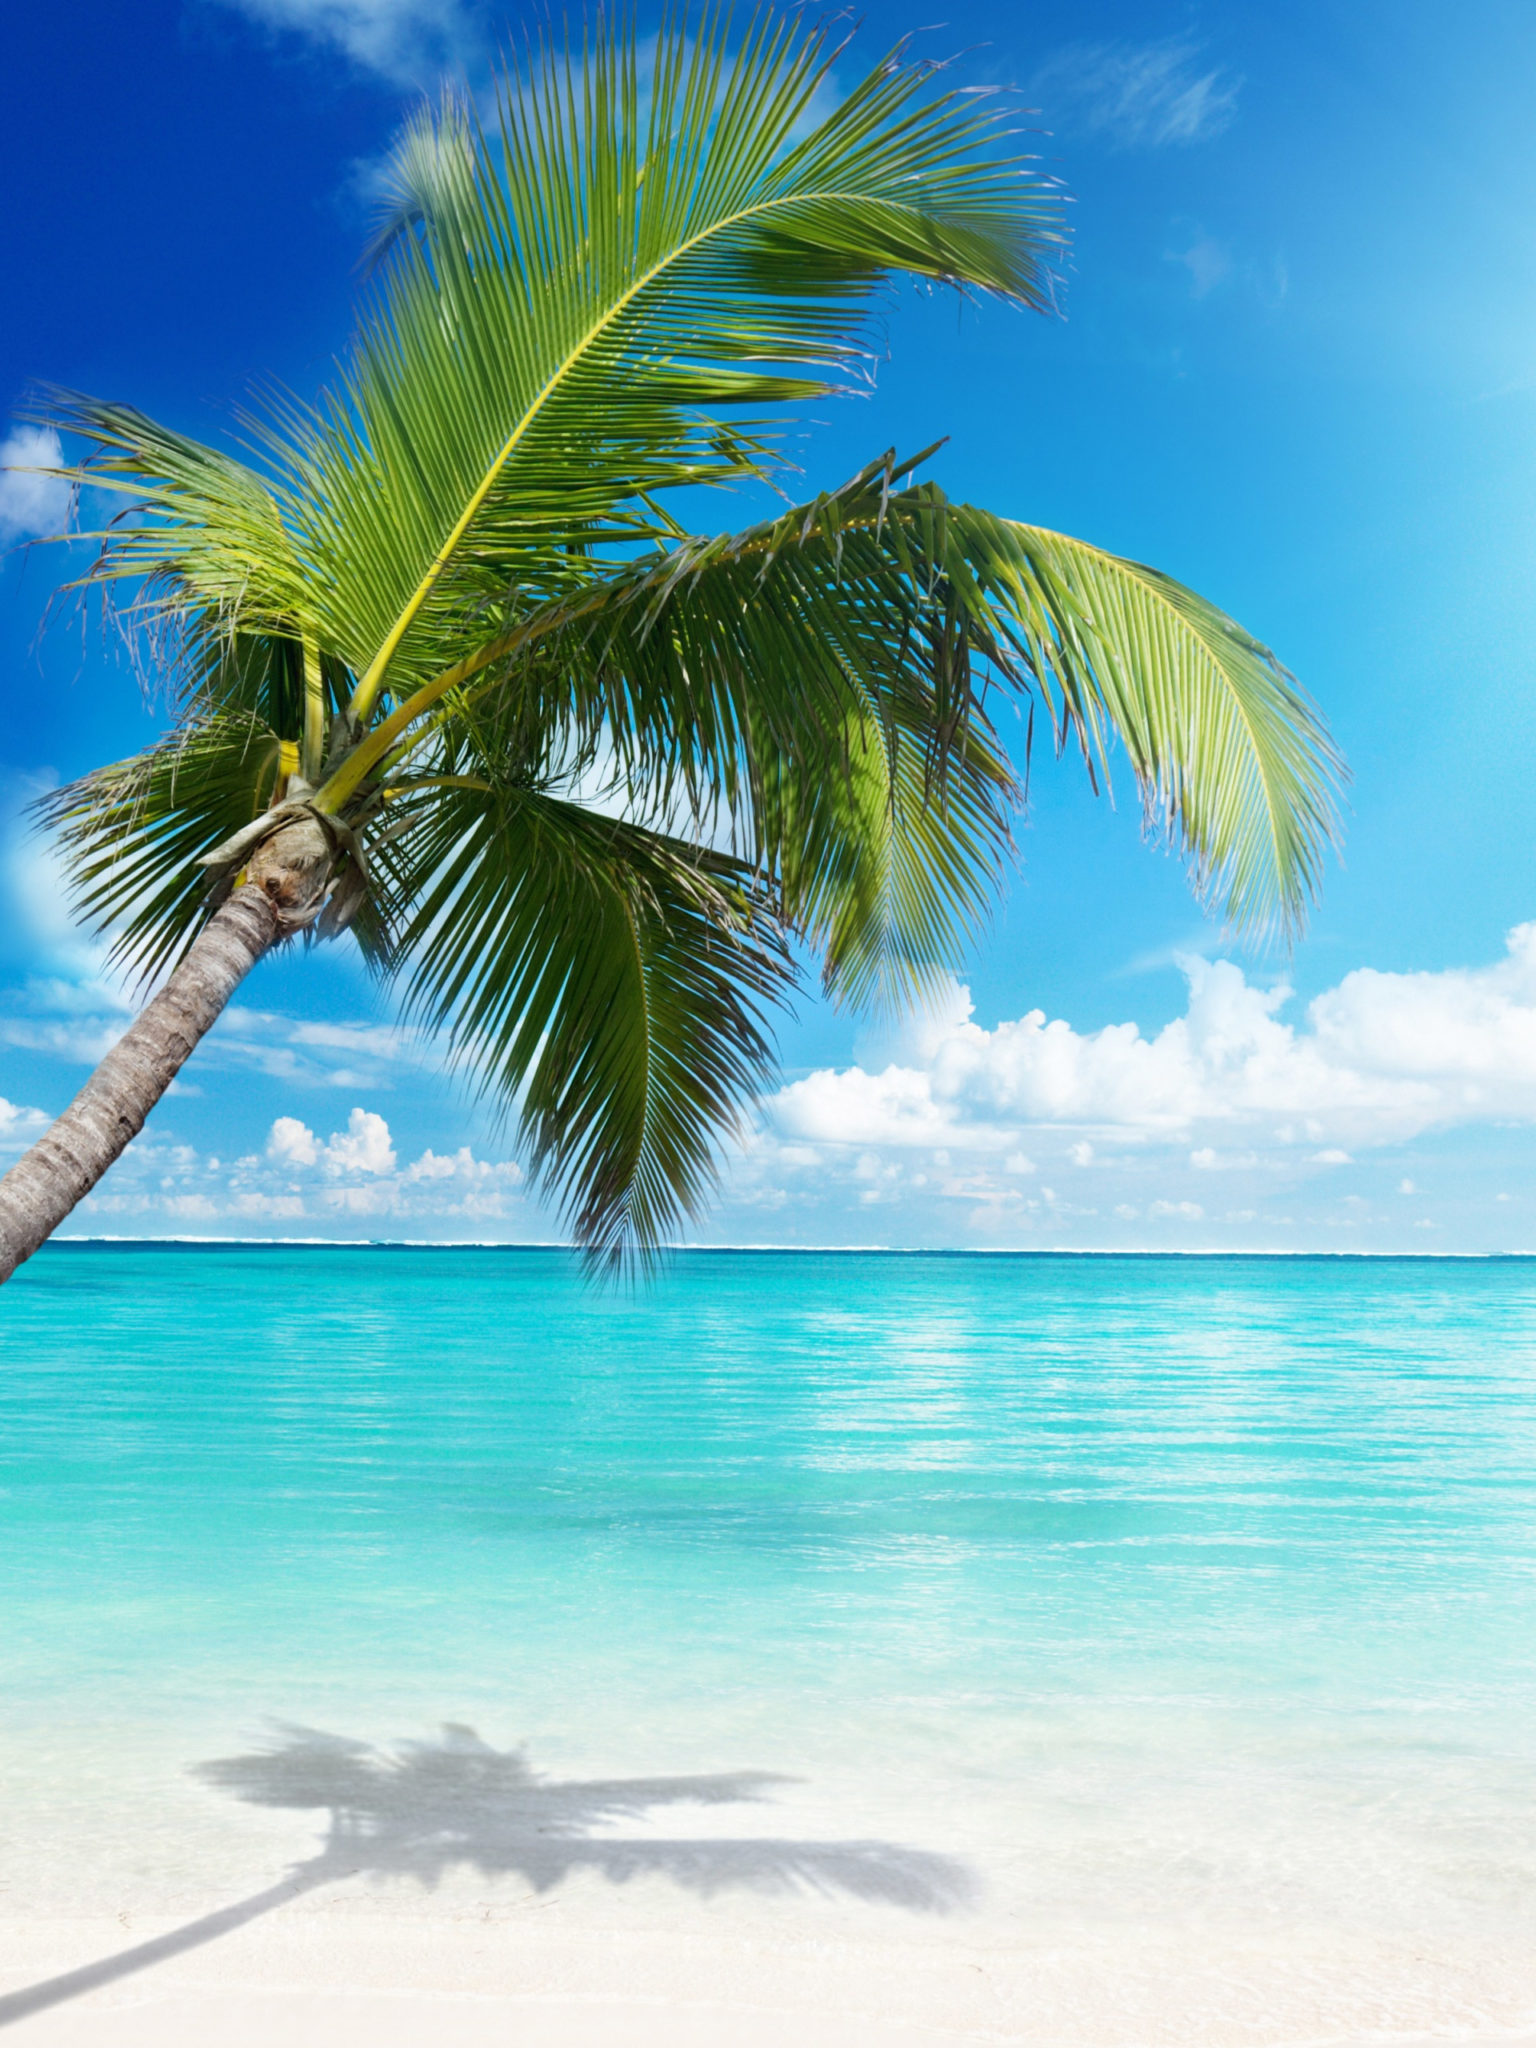 The Beach Amazing Nature Wallpaper Photos – HD Wallpapers Backgrounds Desktop, iphone & Android Free Download